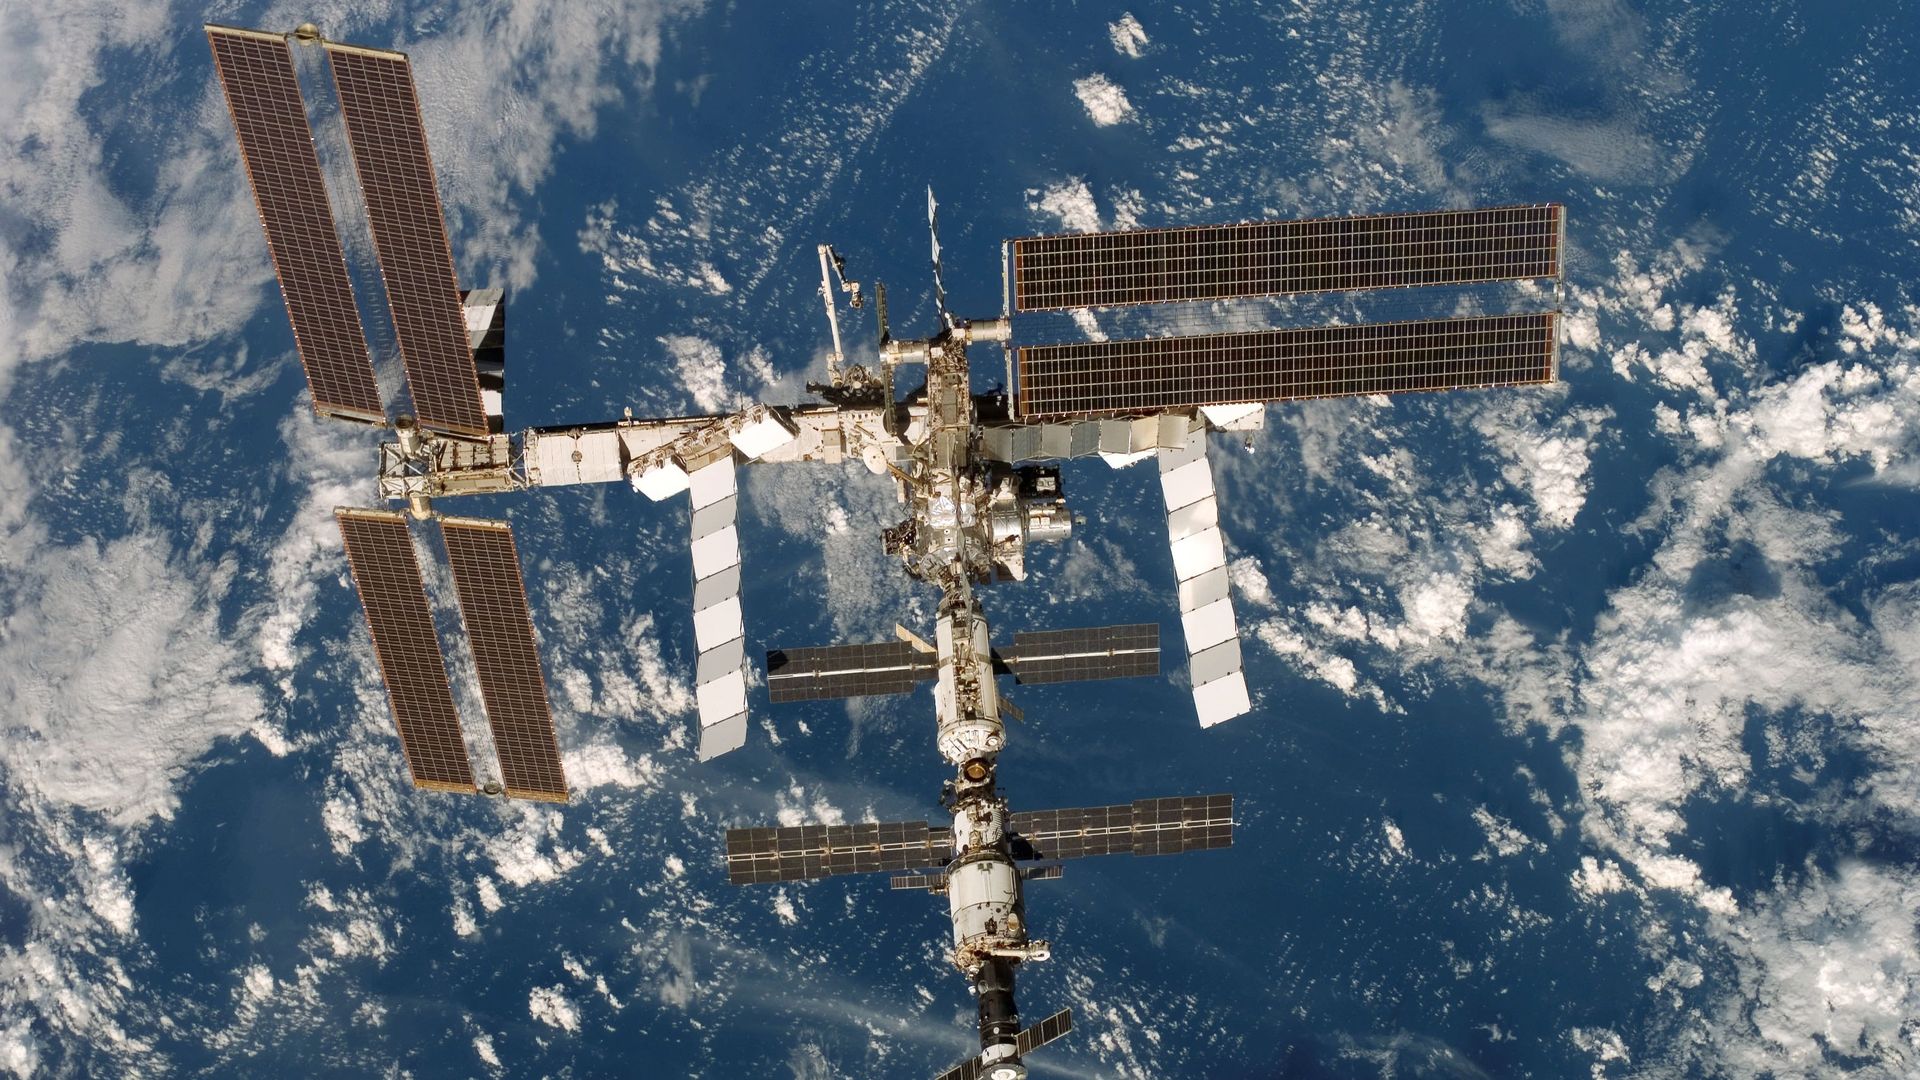 The International Space Station photographed in December 2006.